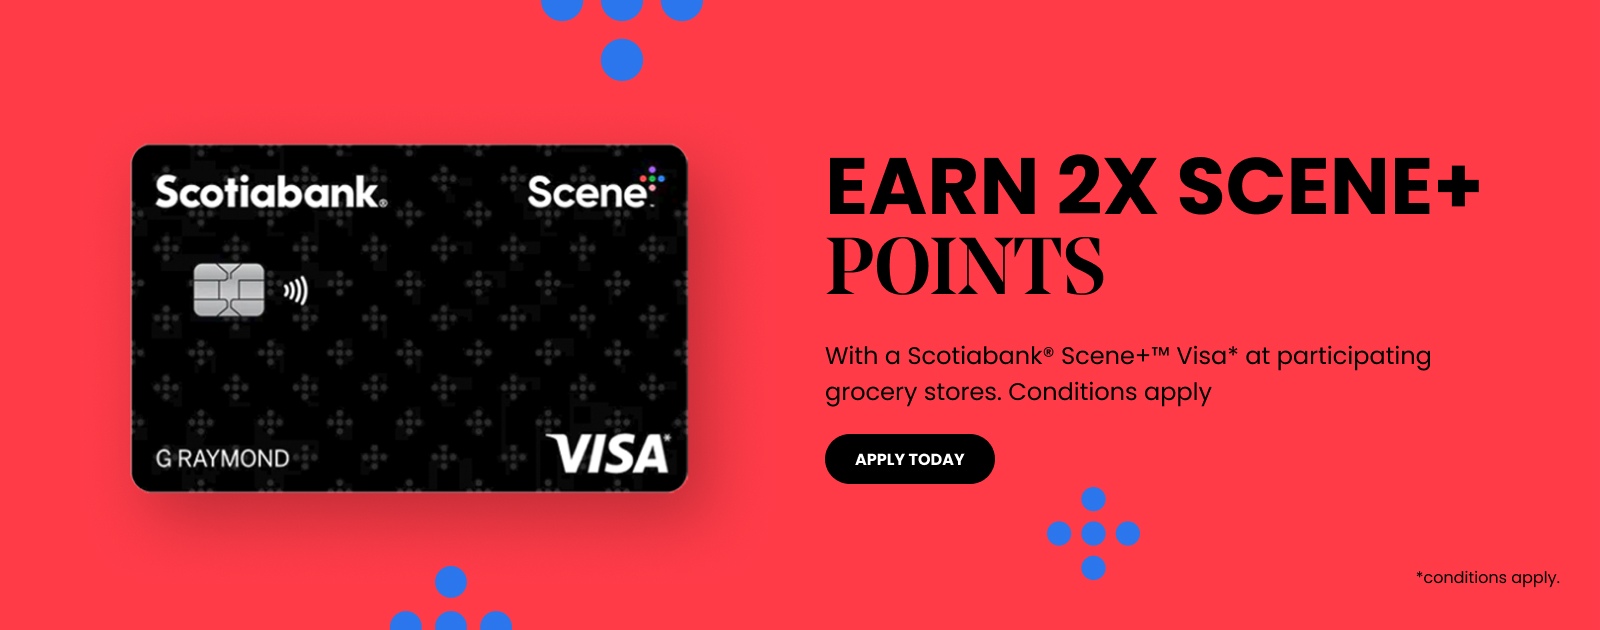 Text Reading “Earn 2 times Scene Plus points with a Scotiabank Scene Plus Visa at participating grocery stores. Conditions apply. Click on the ‘Apply Today’ button to apply.”